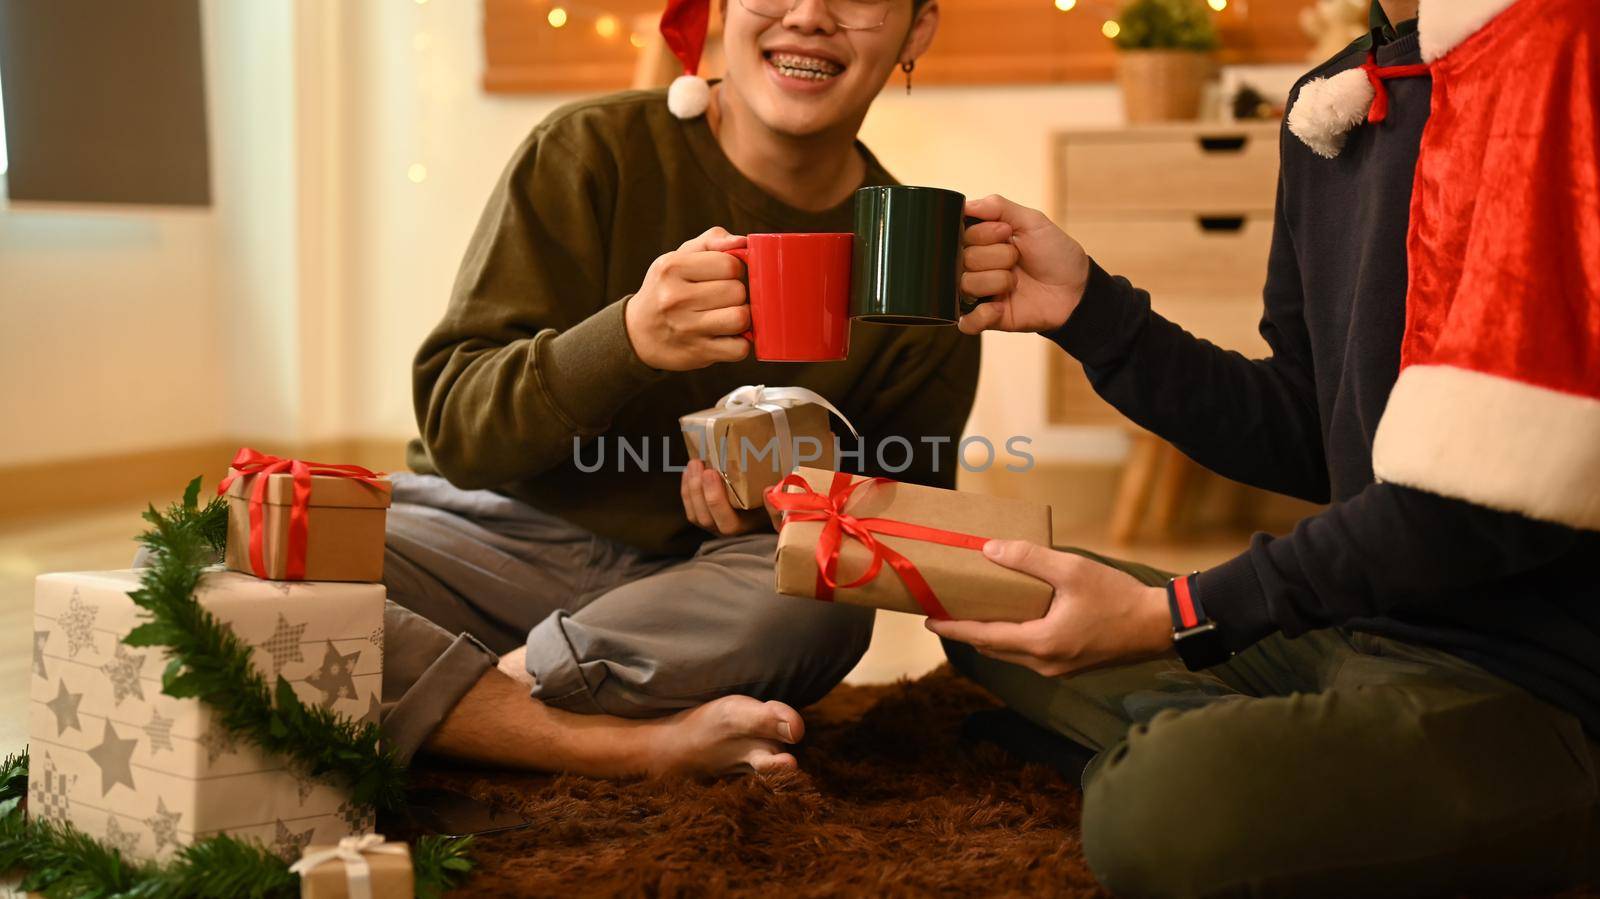 Two happy men clinking cups of hot chocolate while celebrating Christmas or New Year together in cozy living room by prathanchorruangsak